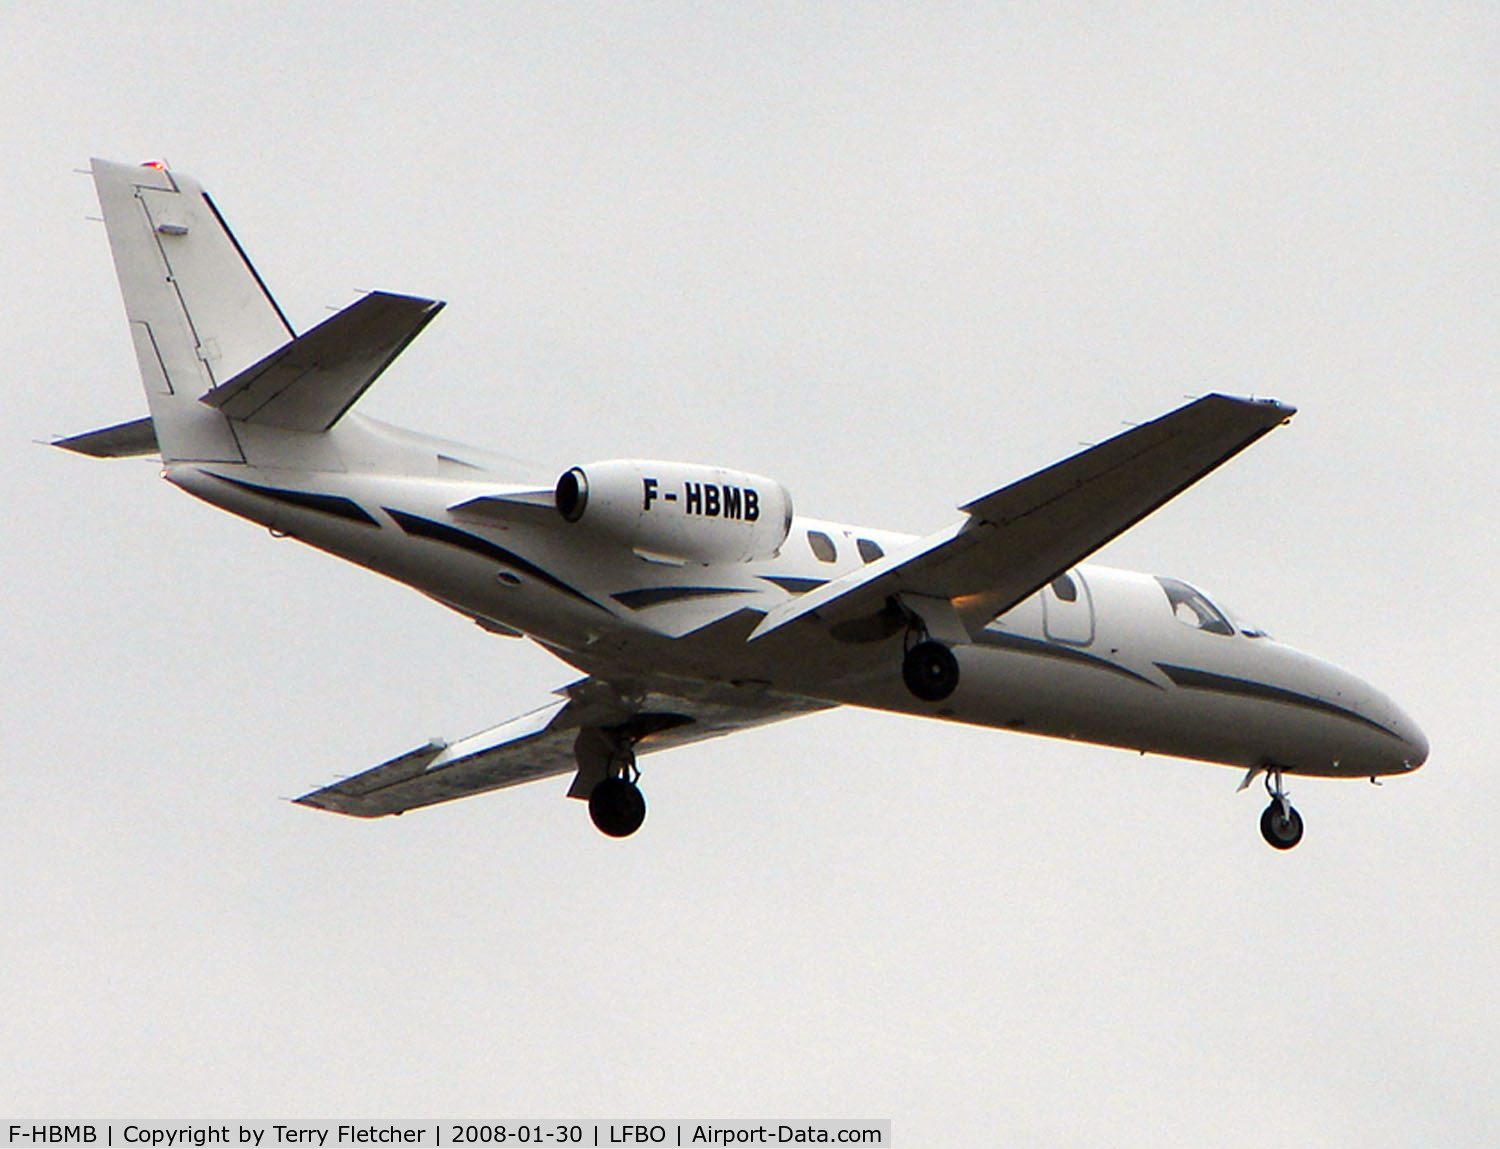 F-HBMB, 1982 Cessna 550 Citation II C/N 550-0324, Citation 550 about to land at Toulouse in January 2008